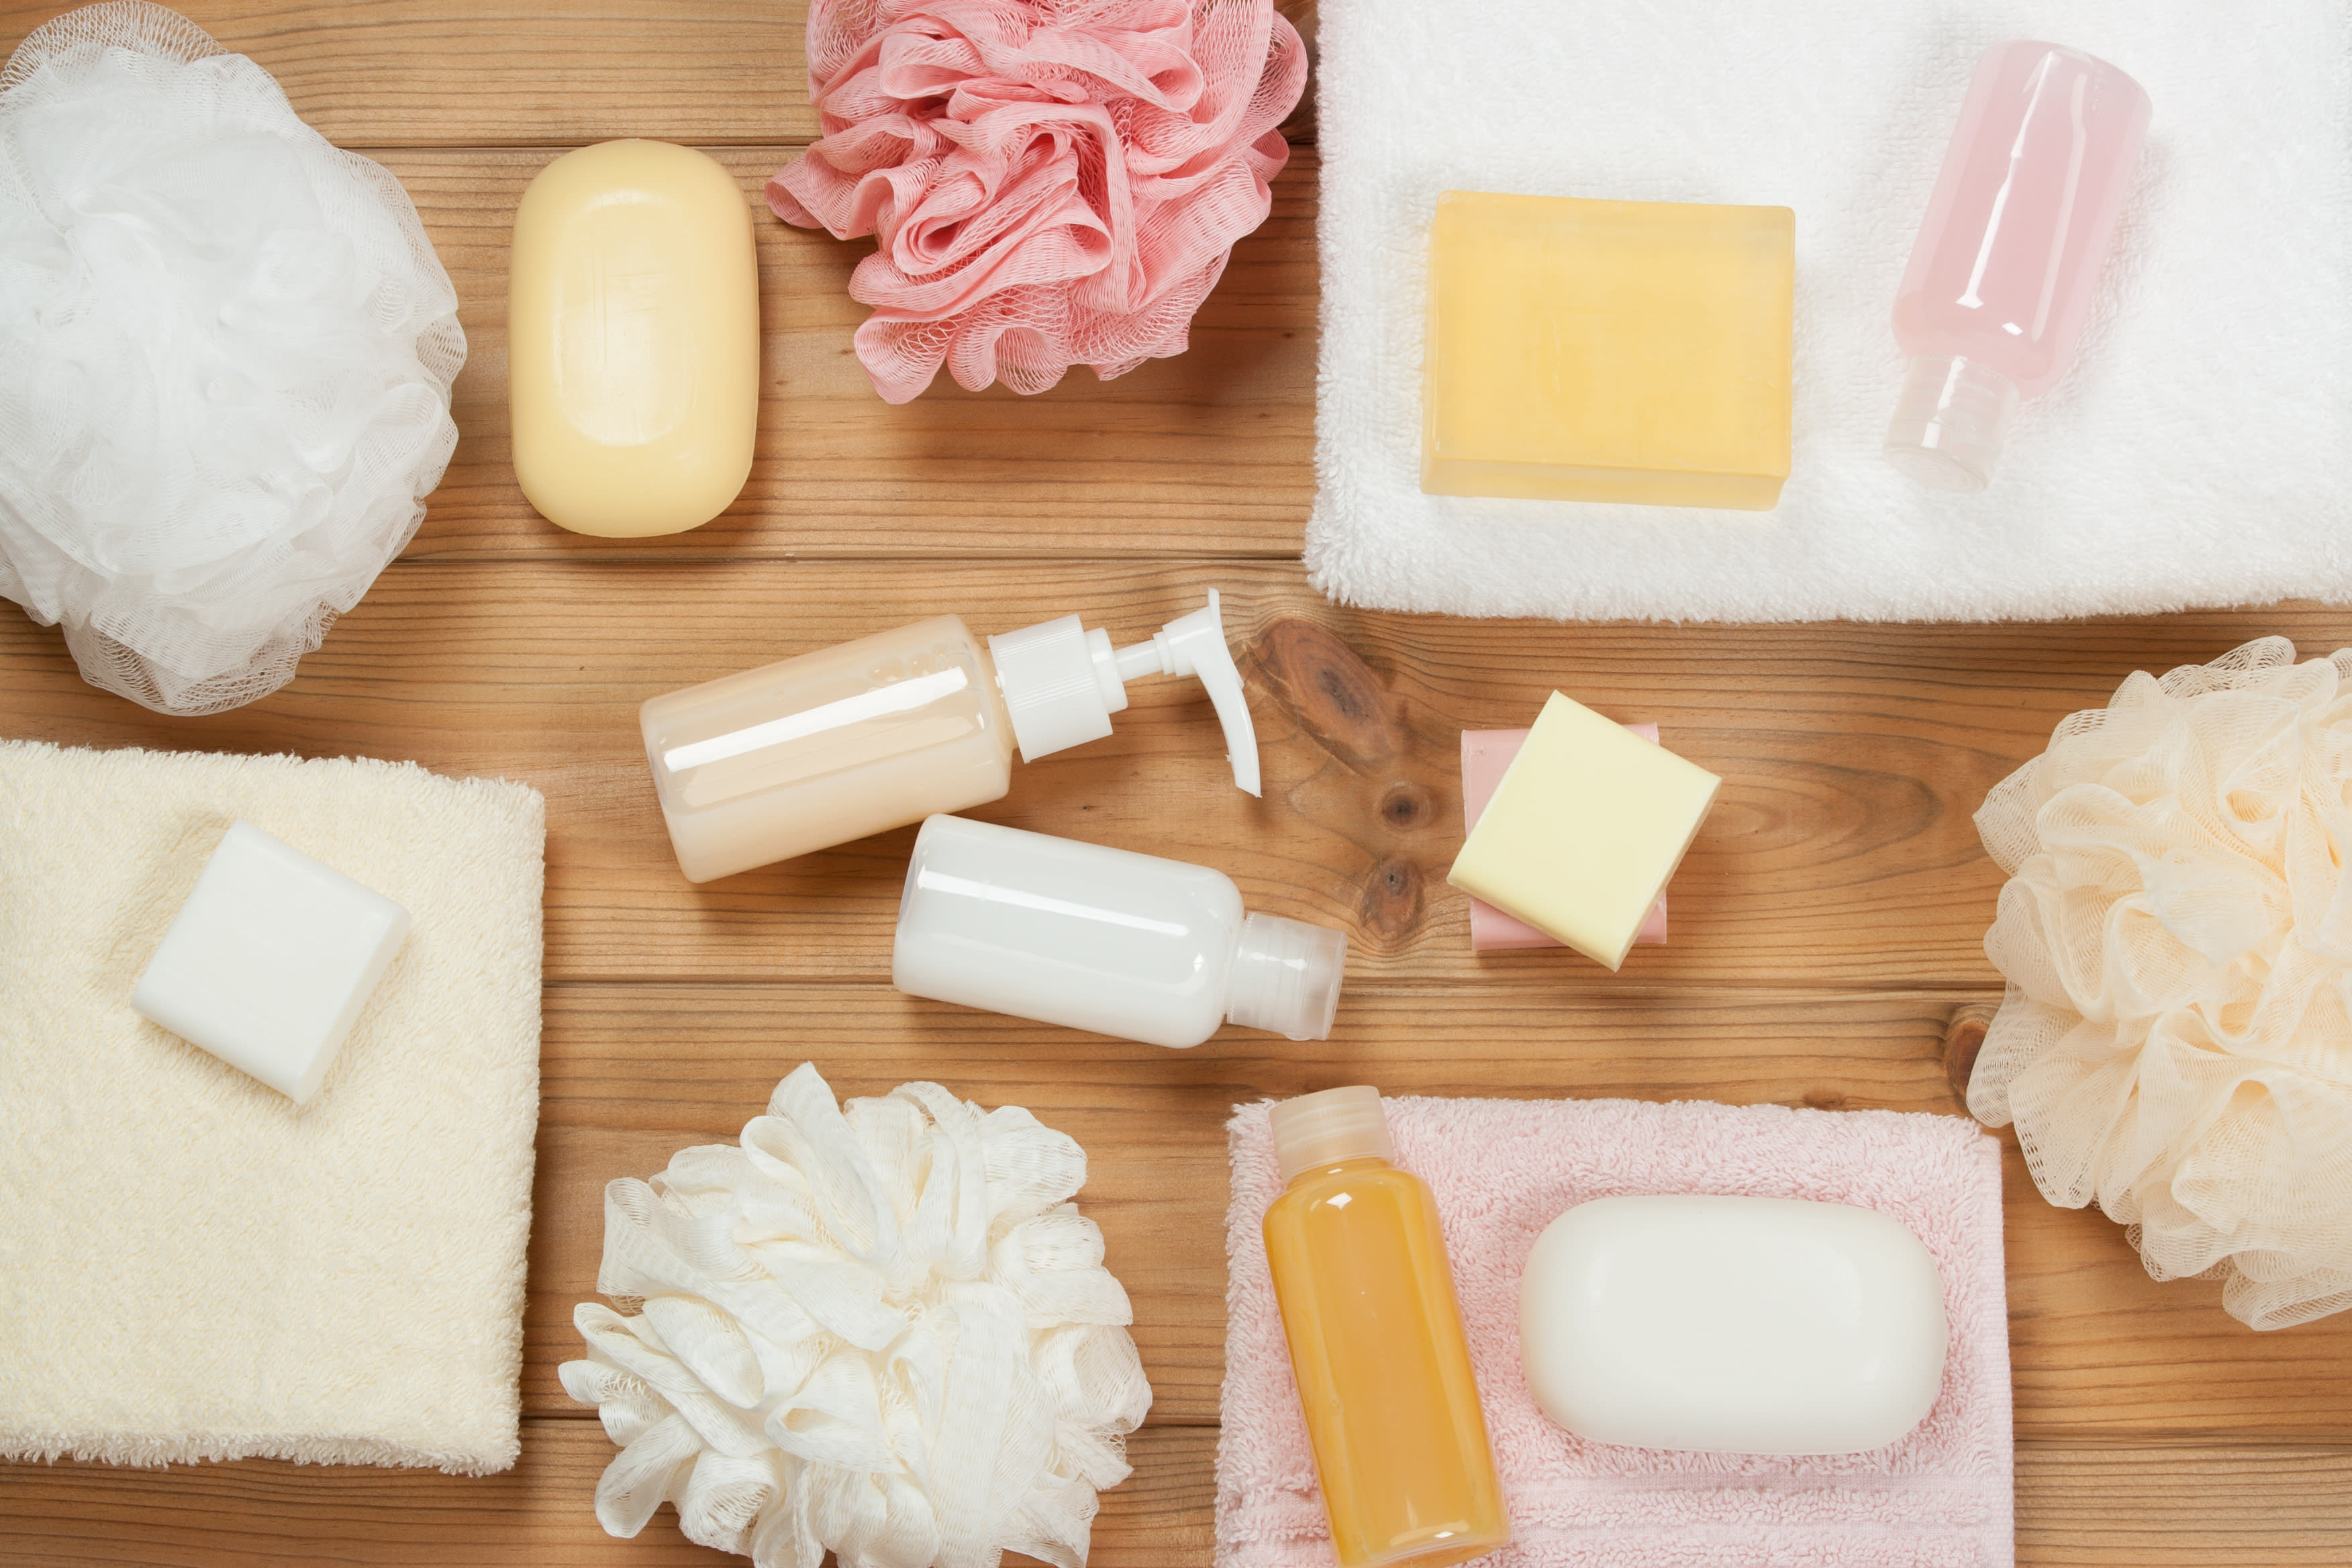 soap and other beauty products